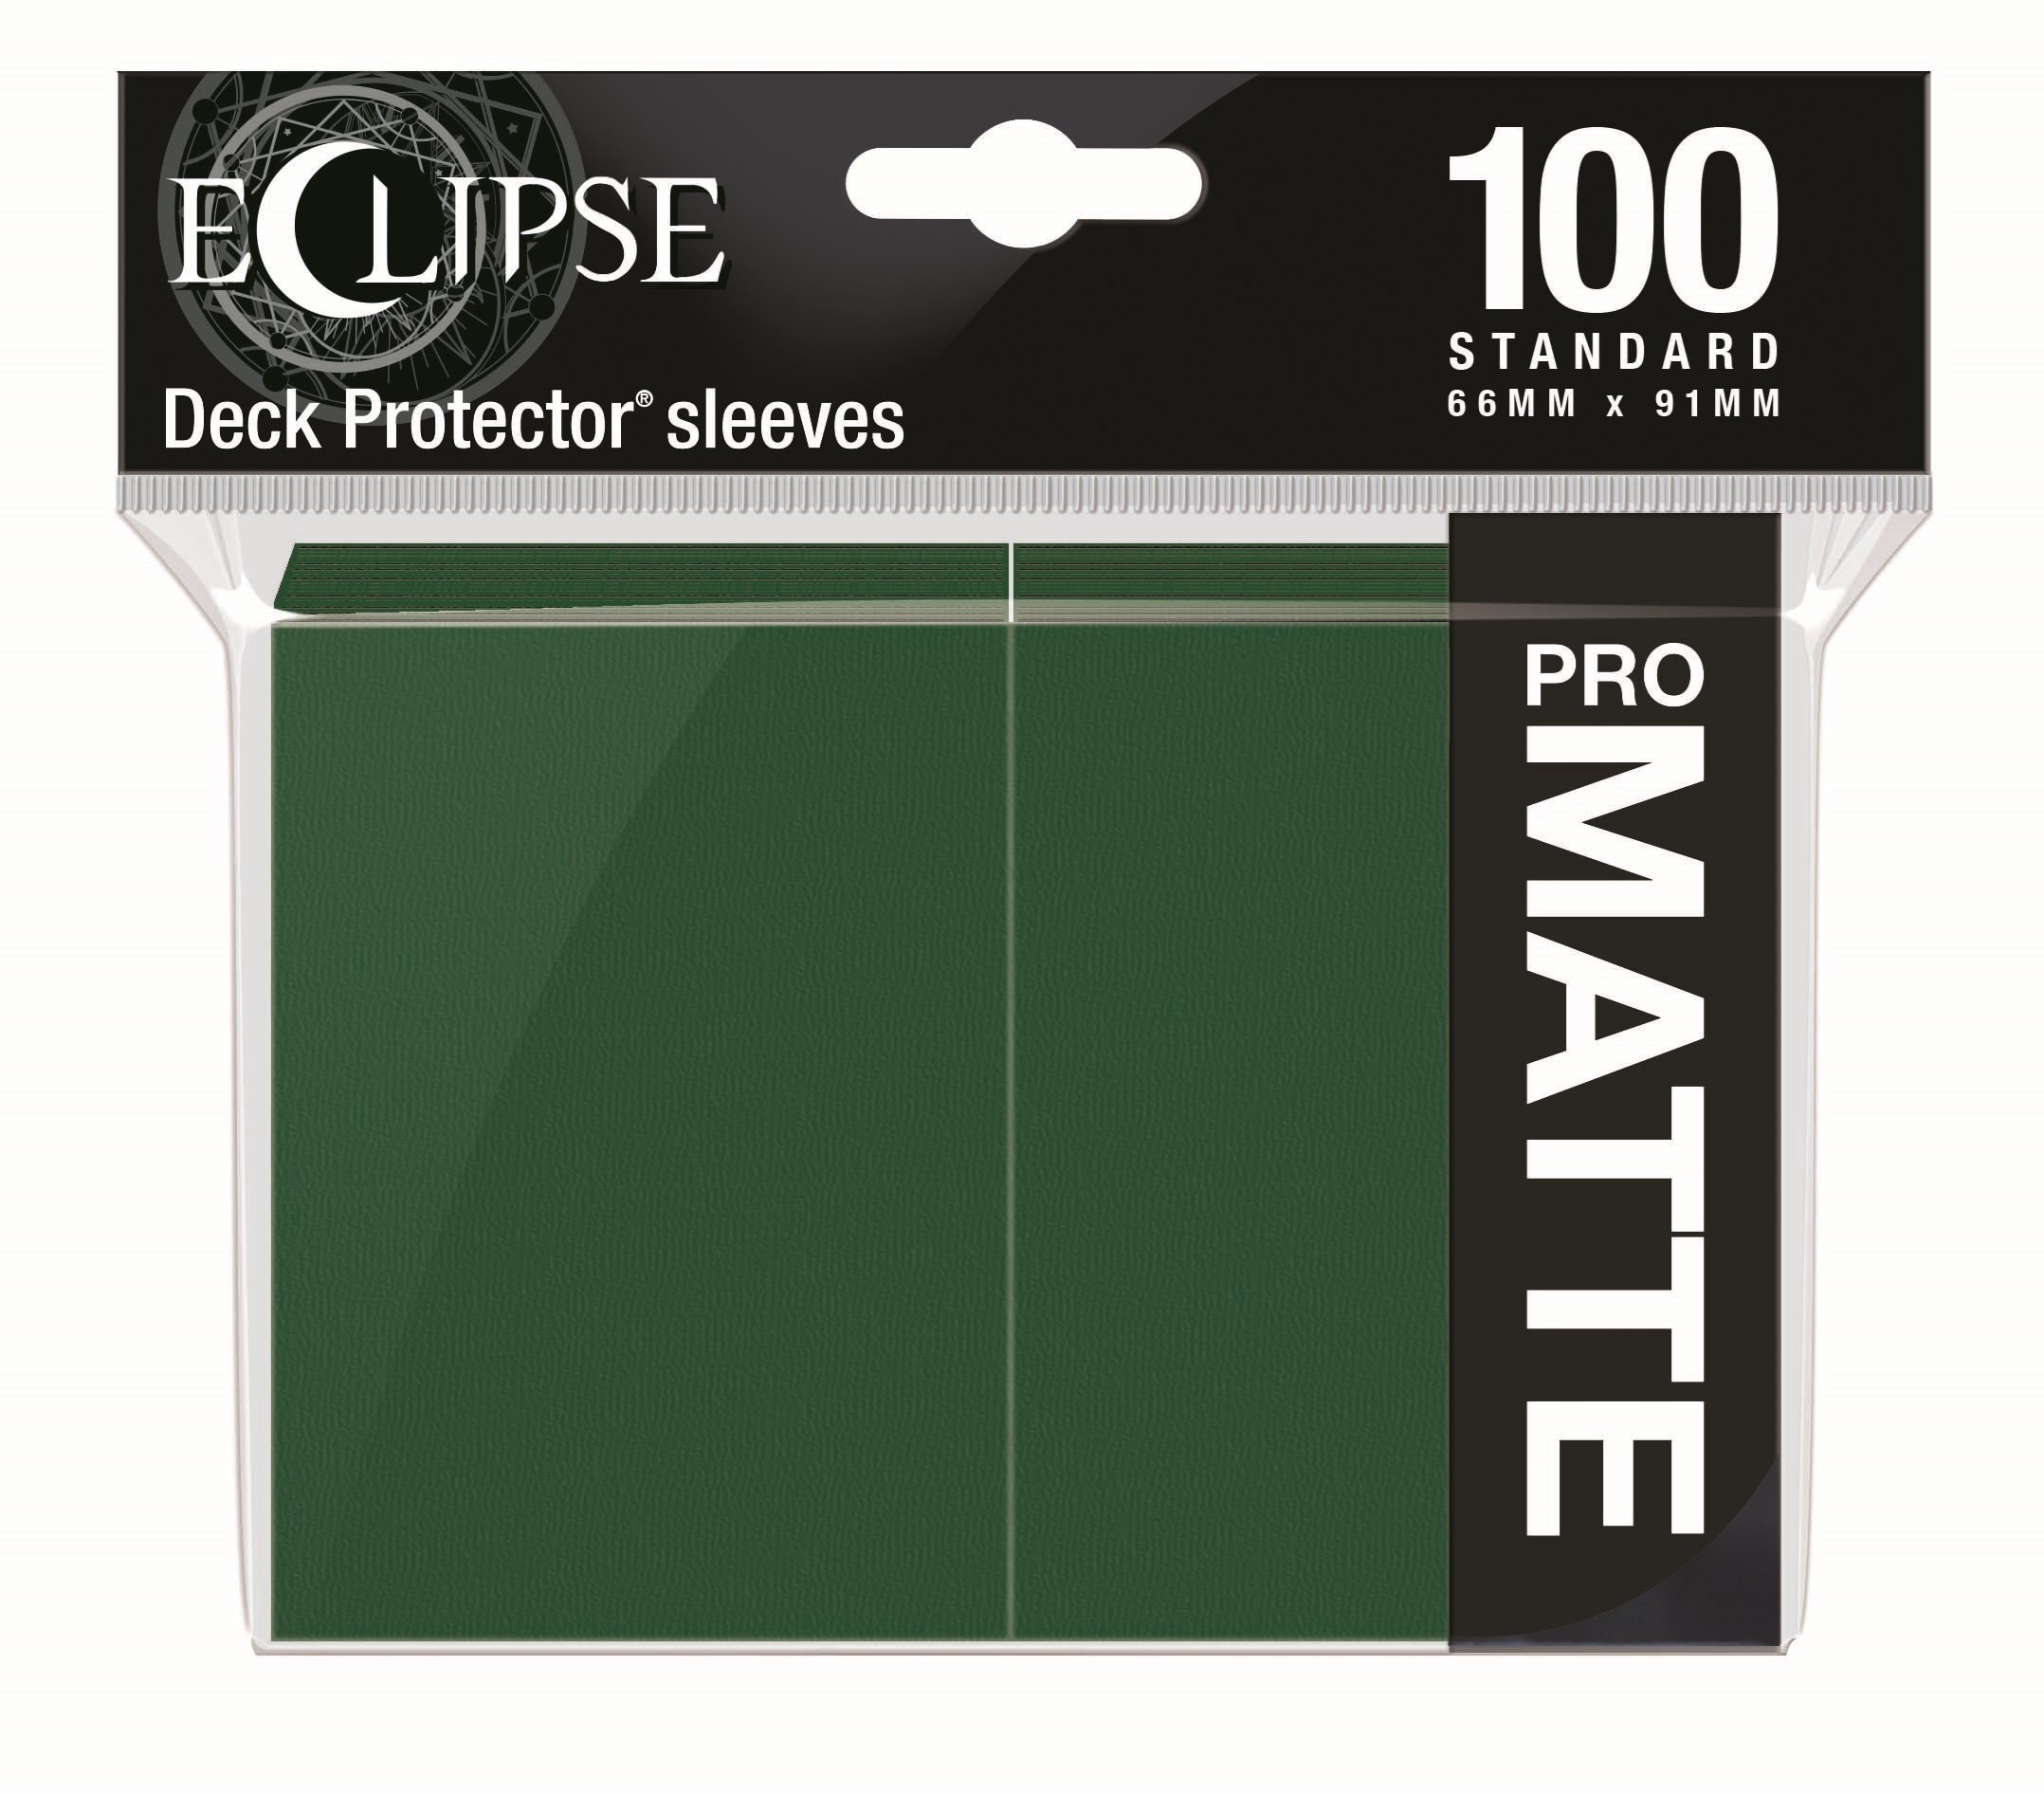 100 Ultra Pro Eclipse Lime Green Pro Matte Deck Protector Sleeves Brand New 